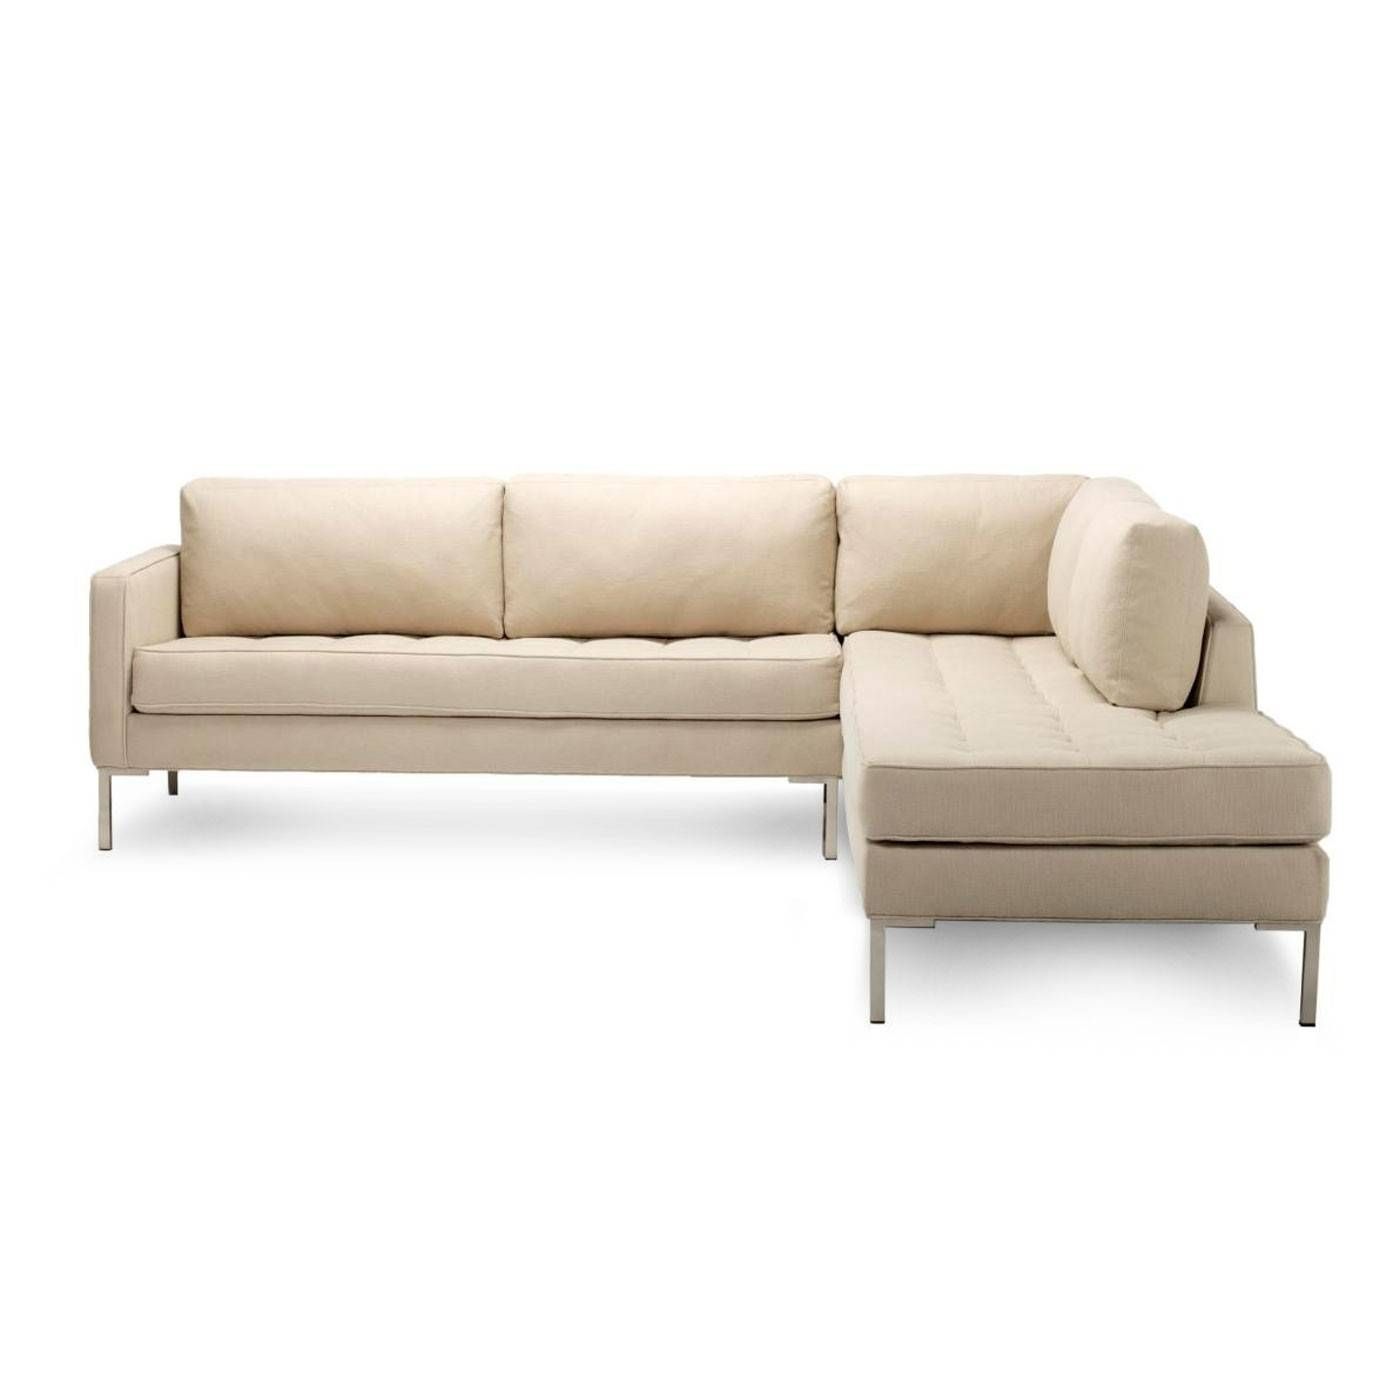 Small Modern Sectional Sofa | Homefurniture With Small Modern Sofas (View 11 of 15)